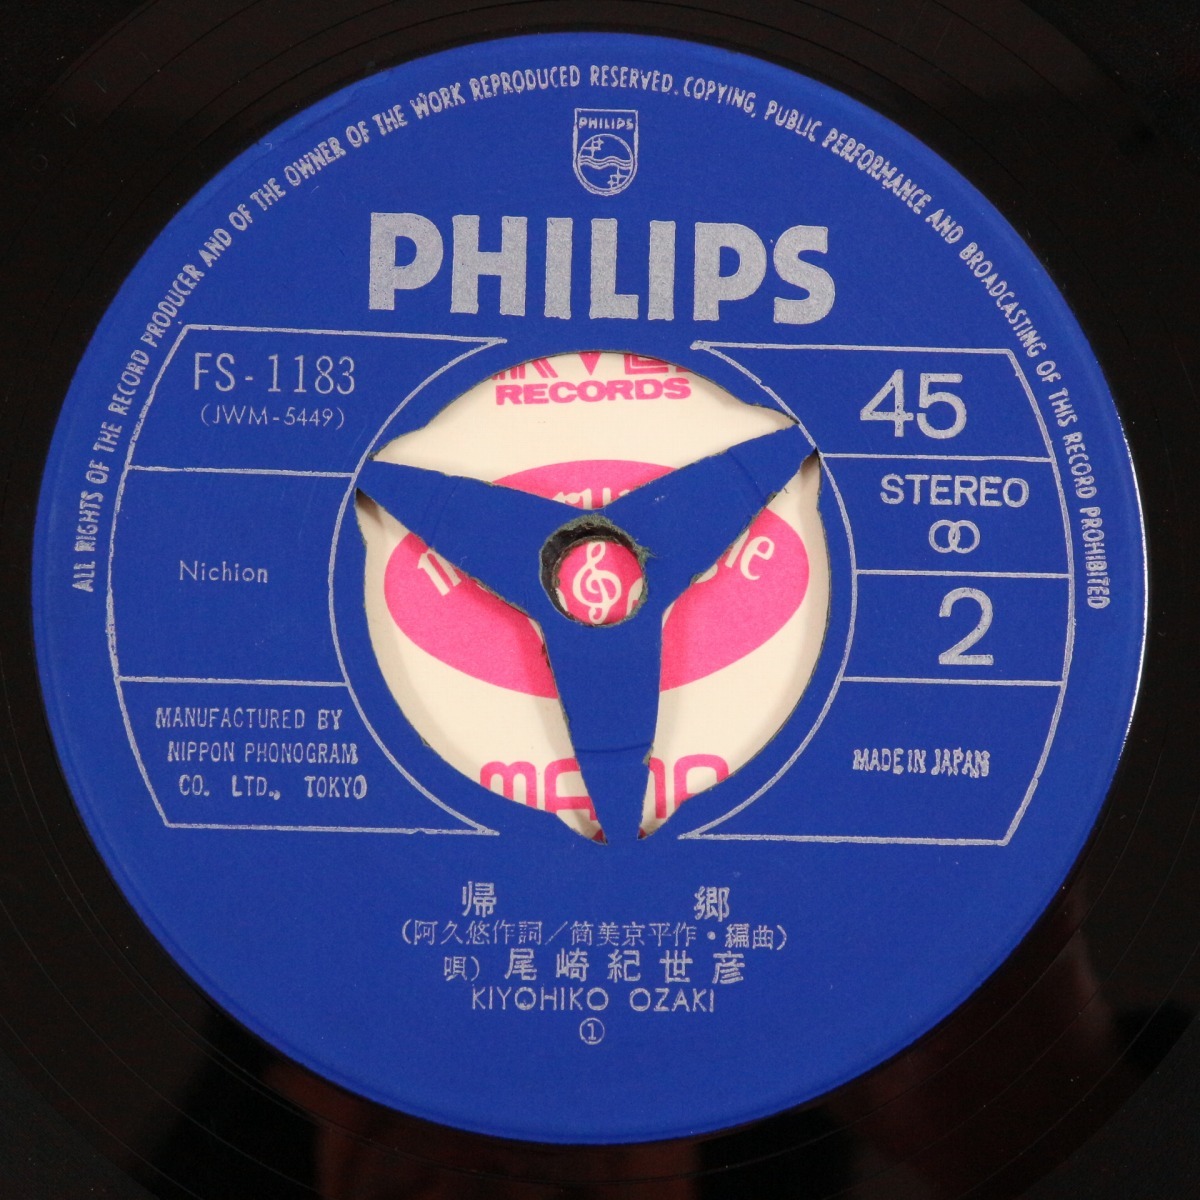 ◆EP◆尾崎紀世彦◆また逢う日まで/帰郷◆Philips FS-1183◆_画像6